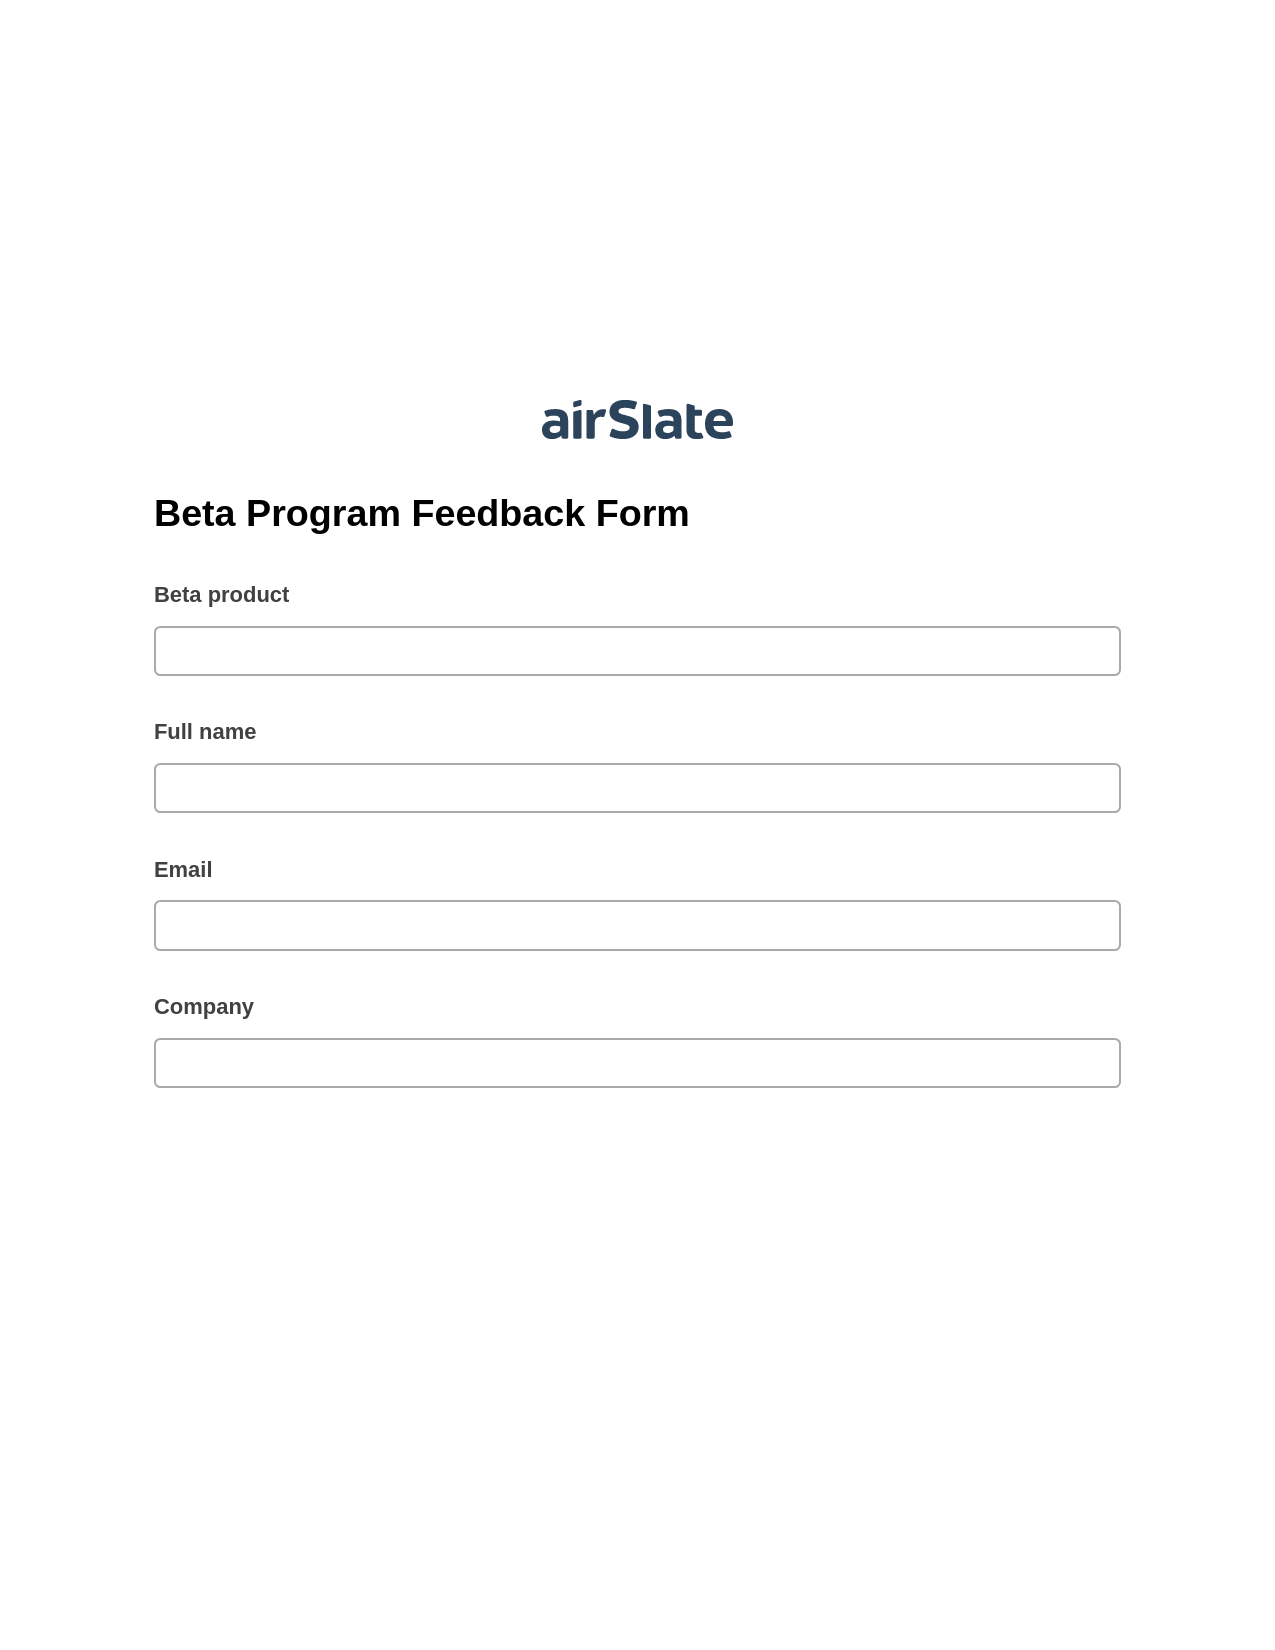 Multirole Beta Program Feedback Form Pre-fill from CSV File Bot, Pre-fill with Custom Data Bot, Export to Salesforce Bot